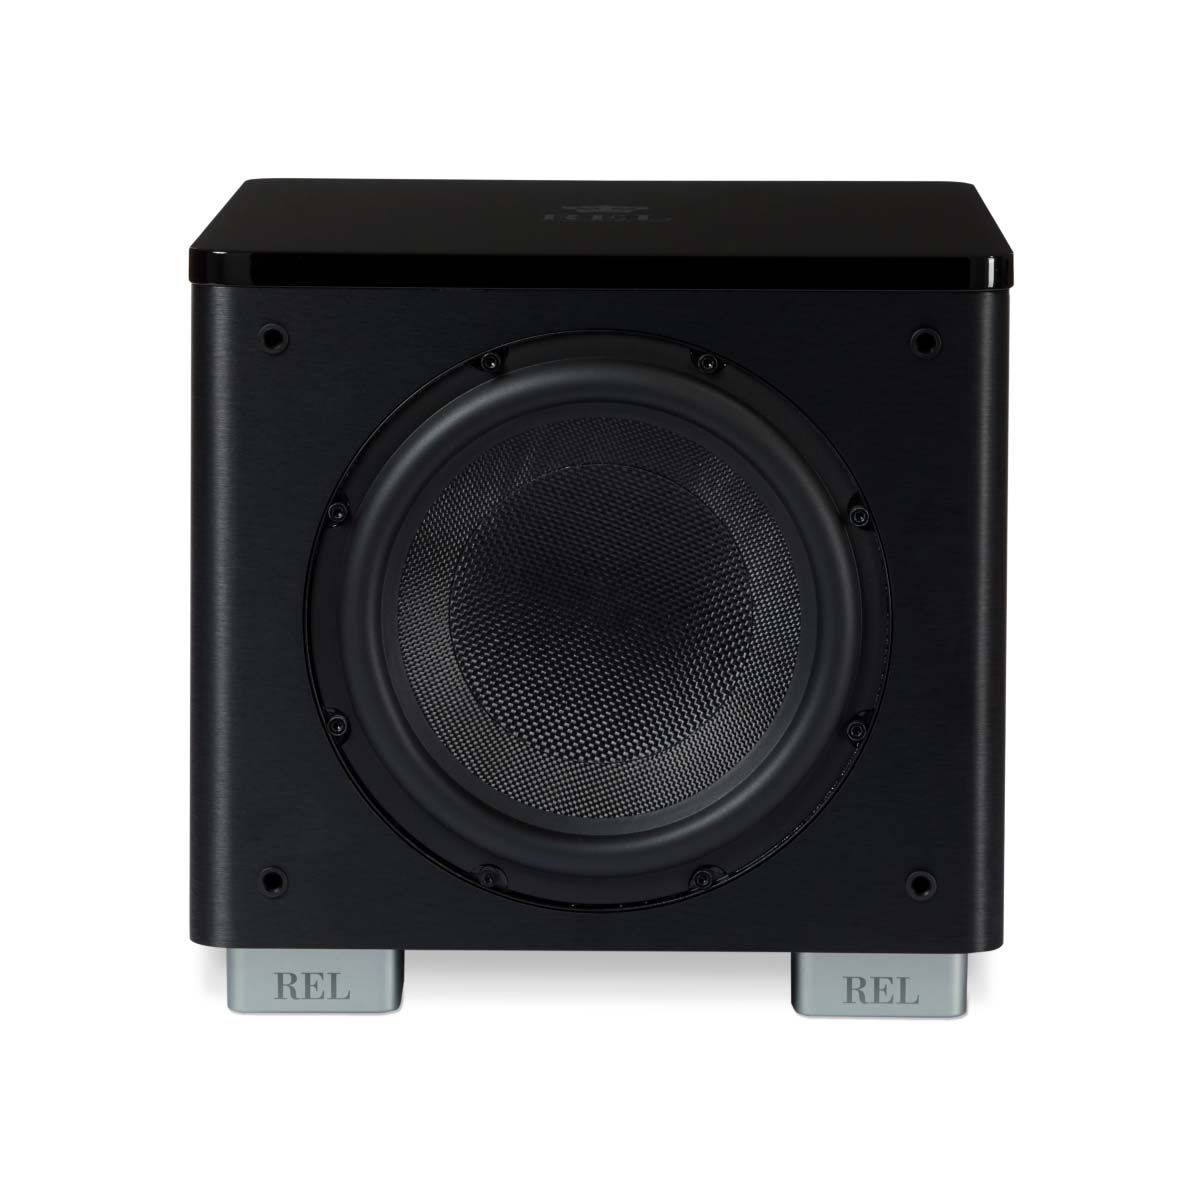 REL Acoustics HT/1003 MKII Subwoofer front view without grille